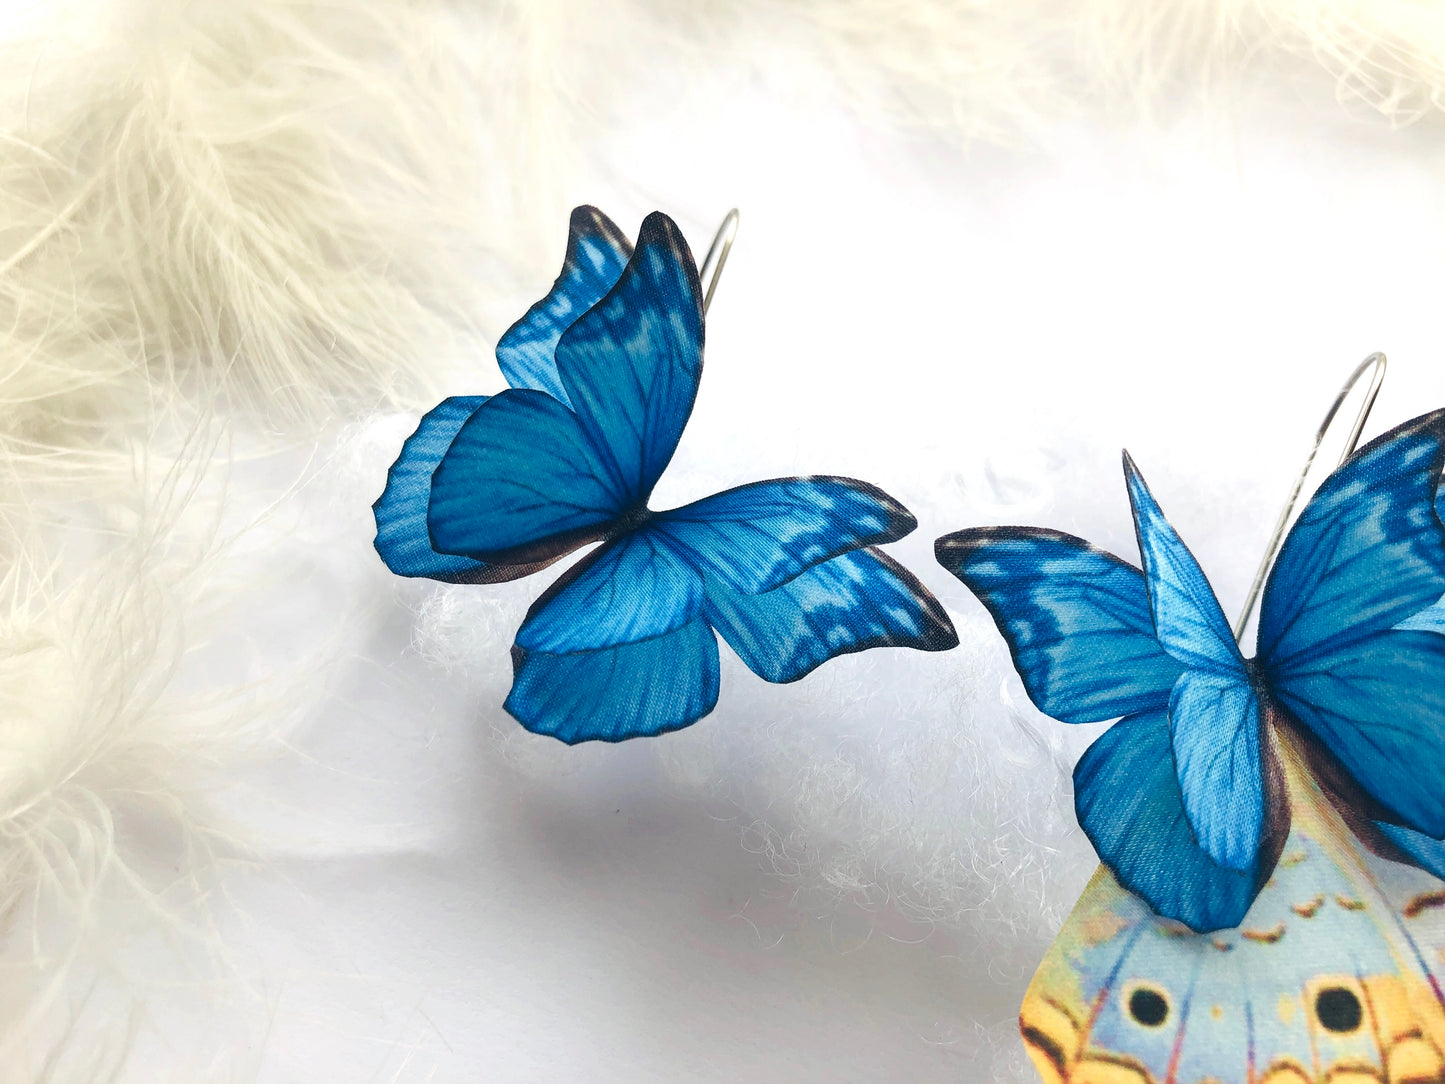 Unique Boho Chic Style Earrings with Blue Butterfly